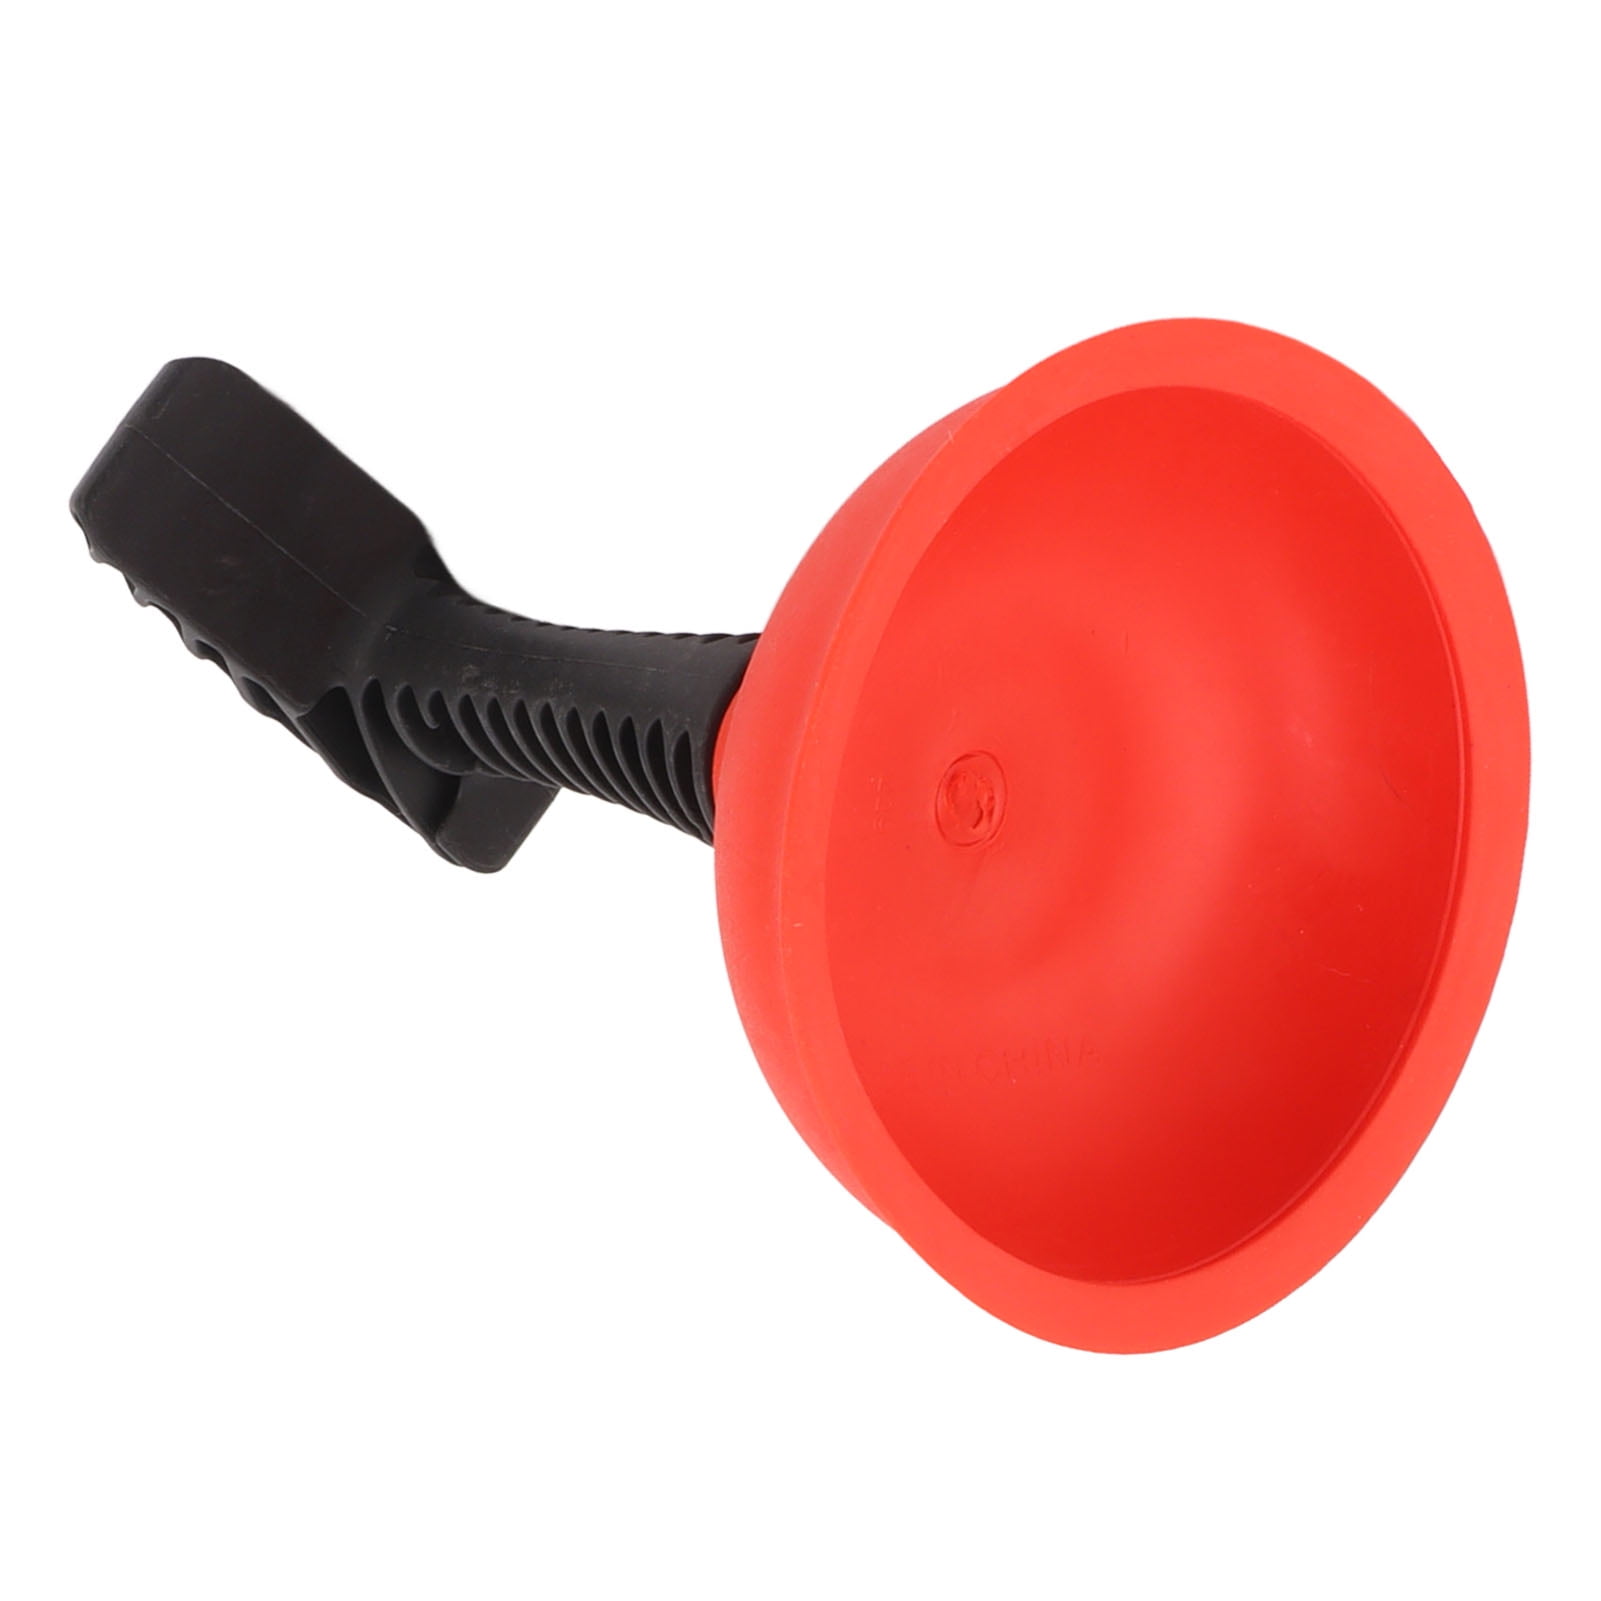 Powerful Sink Plunger Tiny Plunger Sink Plunger Home Depot 2023Best